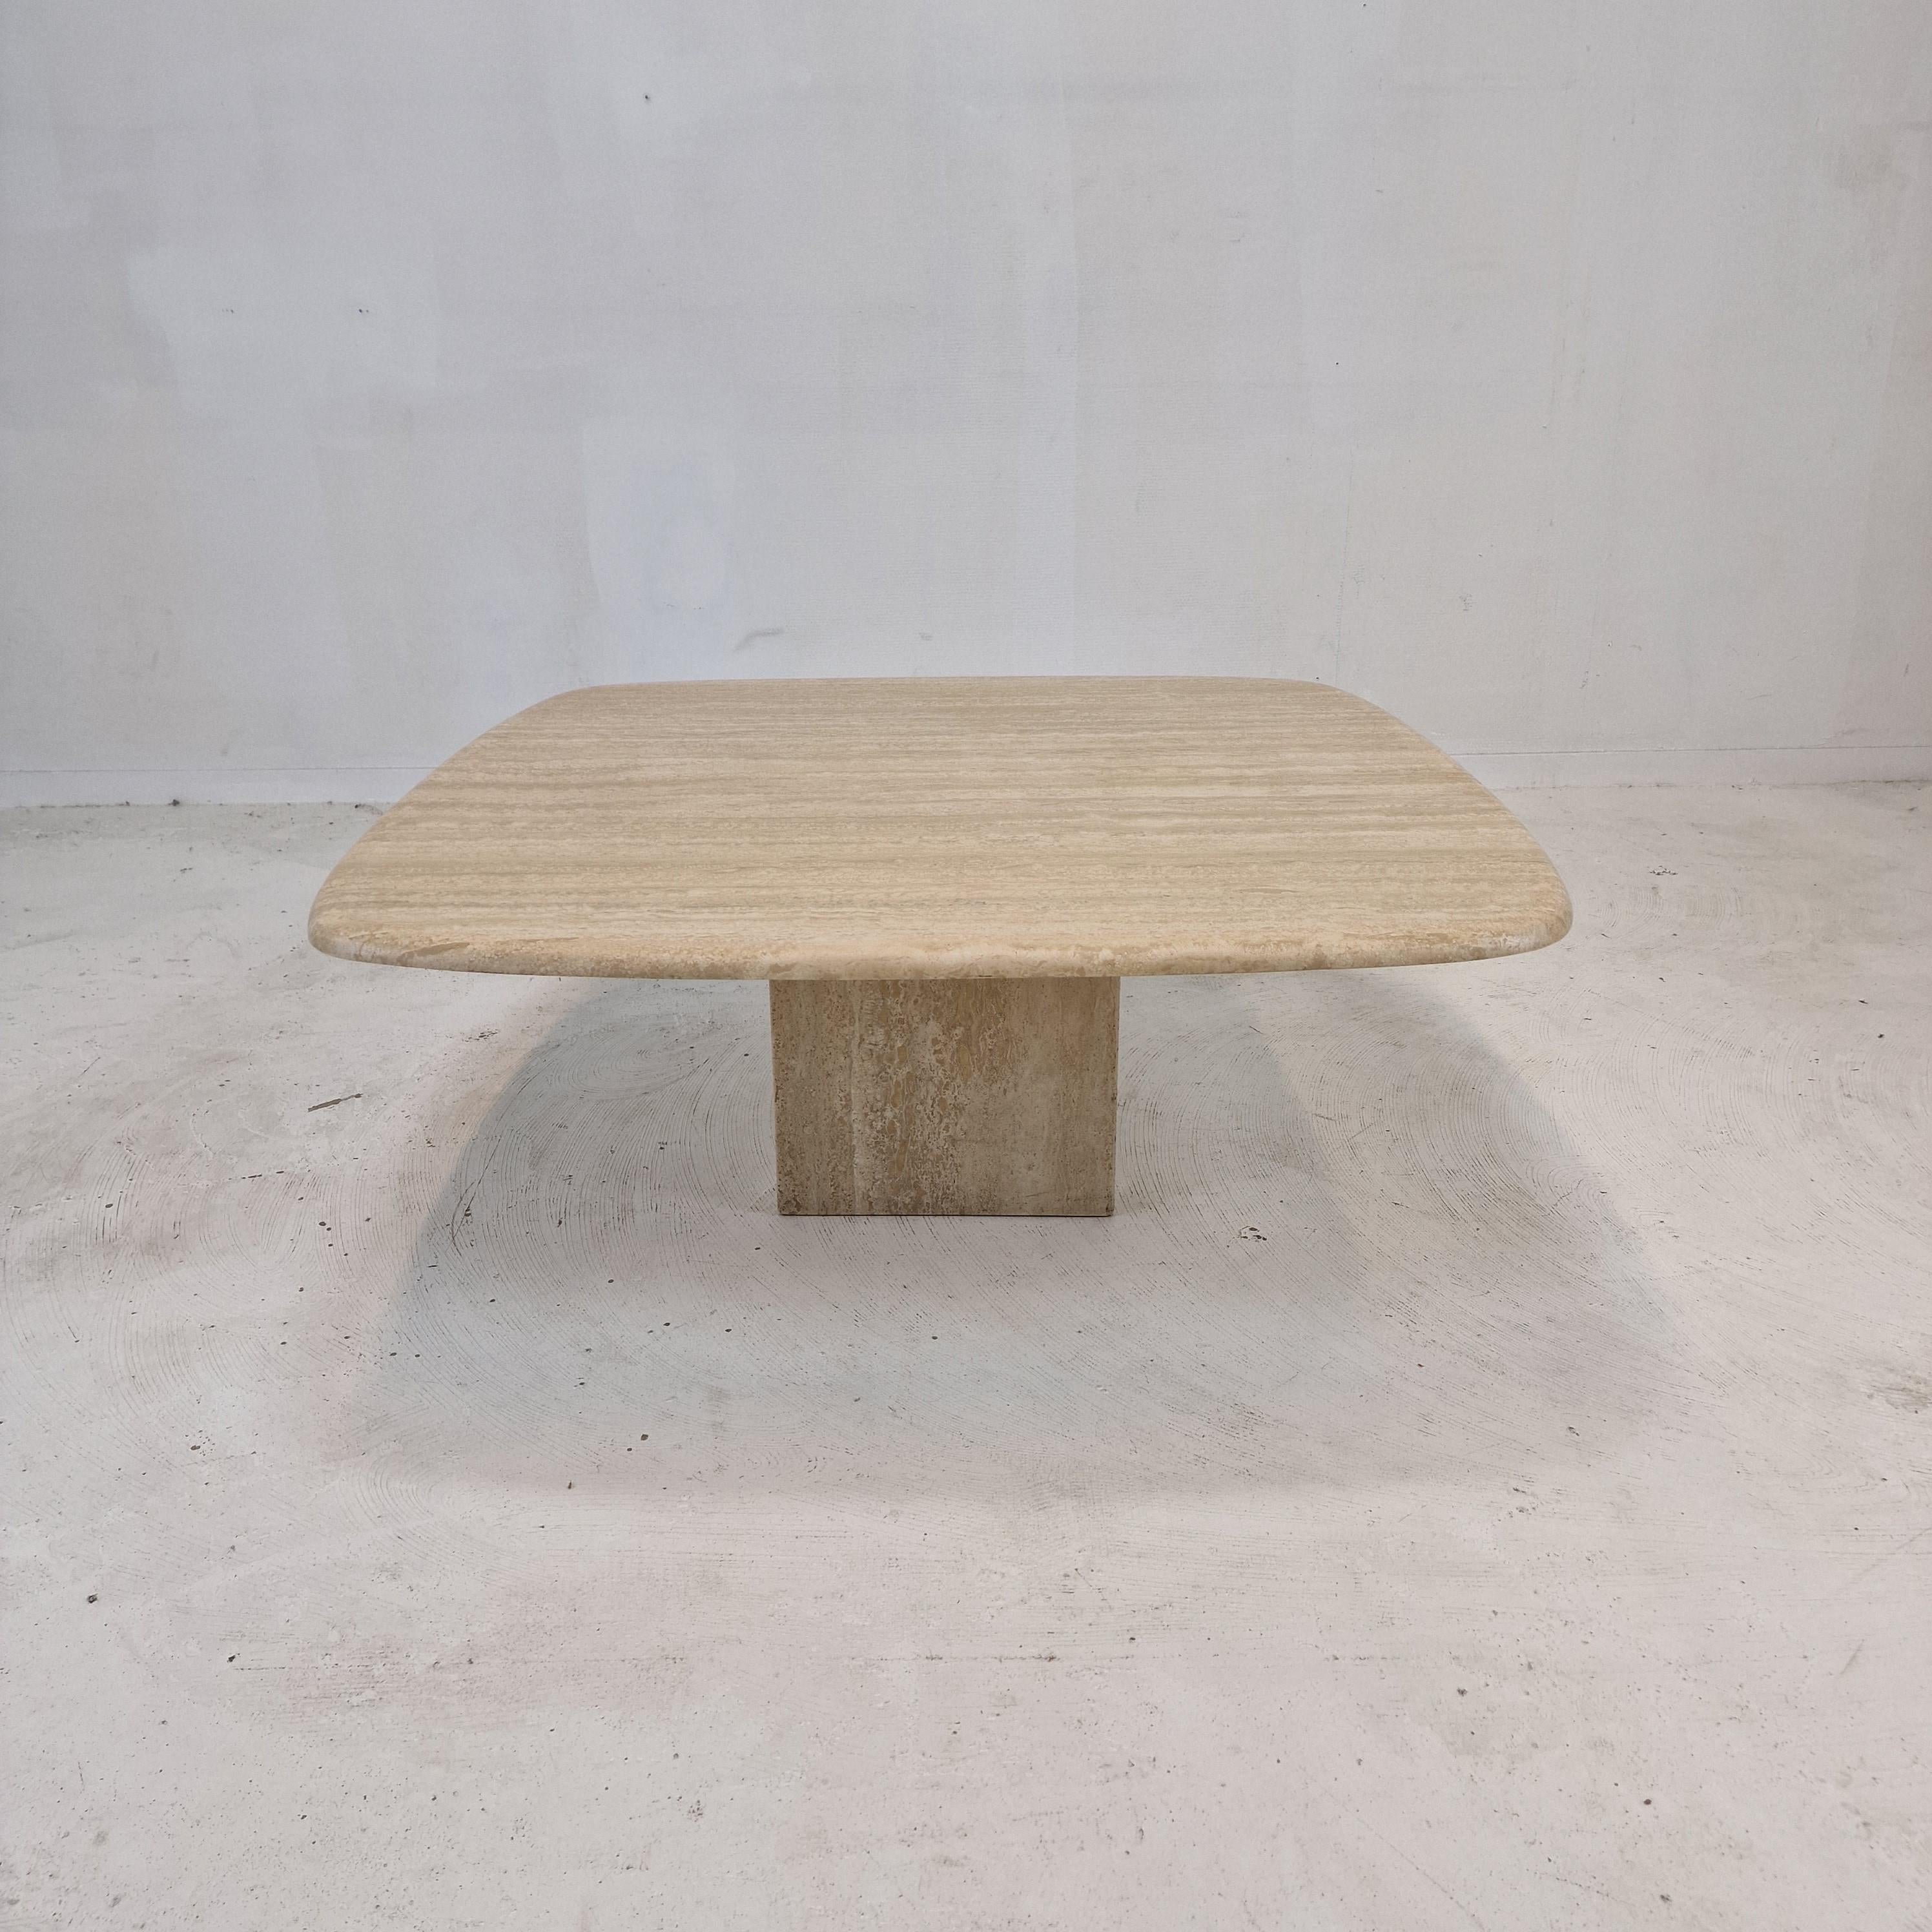 Very nice Italian coffee or side table handcrafted out of travertine, 1980s.

The top is rounded on the edge. 
It is made of beautiful travertine.
Please take notice of the very nice patterns.

It has the normal traces of use, see the